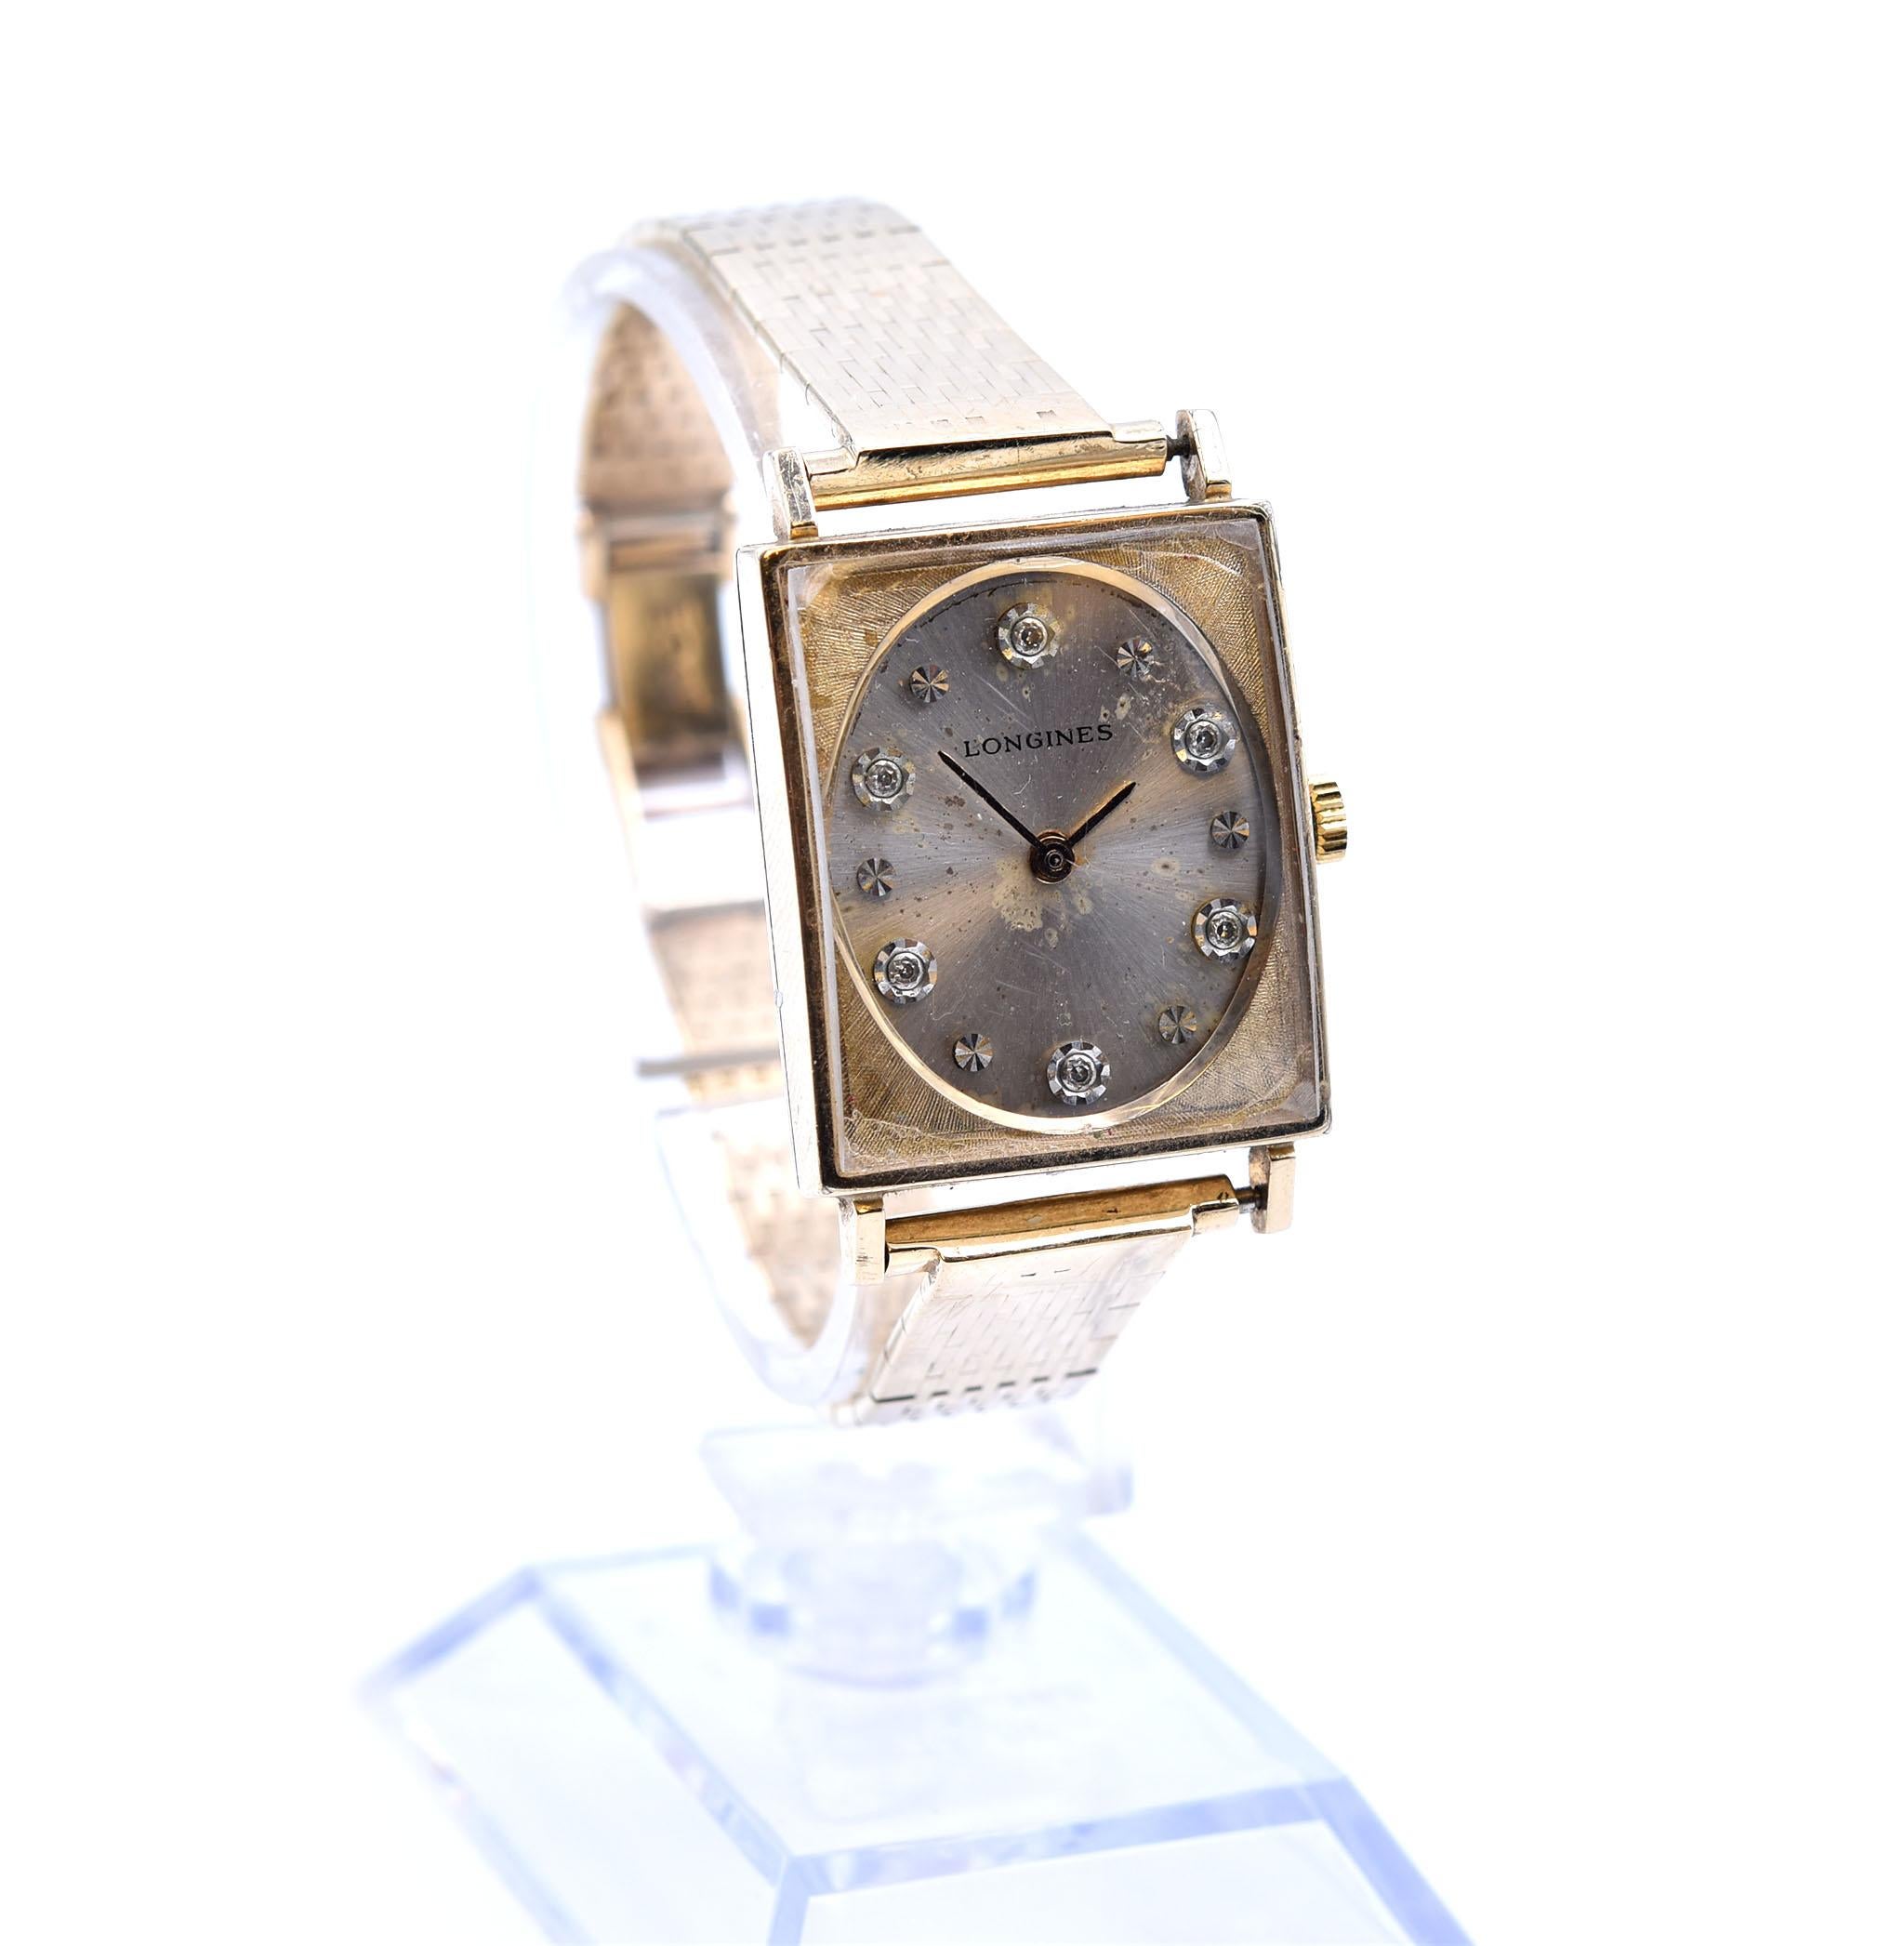 Movement: quartz
Function: hours, minutes
Case: 28.38mm by 23.88mm rectangle 10k yellow gold-filled case, plastic crystal, pull/push crown
Dial: silver dial with diamond hour markers, silver hands
Band: 14k yellow gold bracelet with double fold down